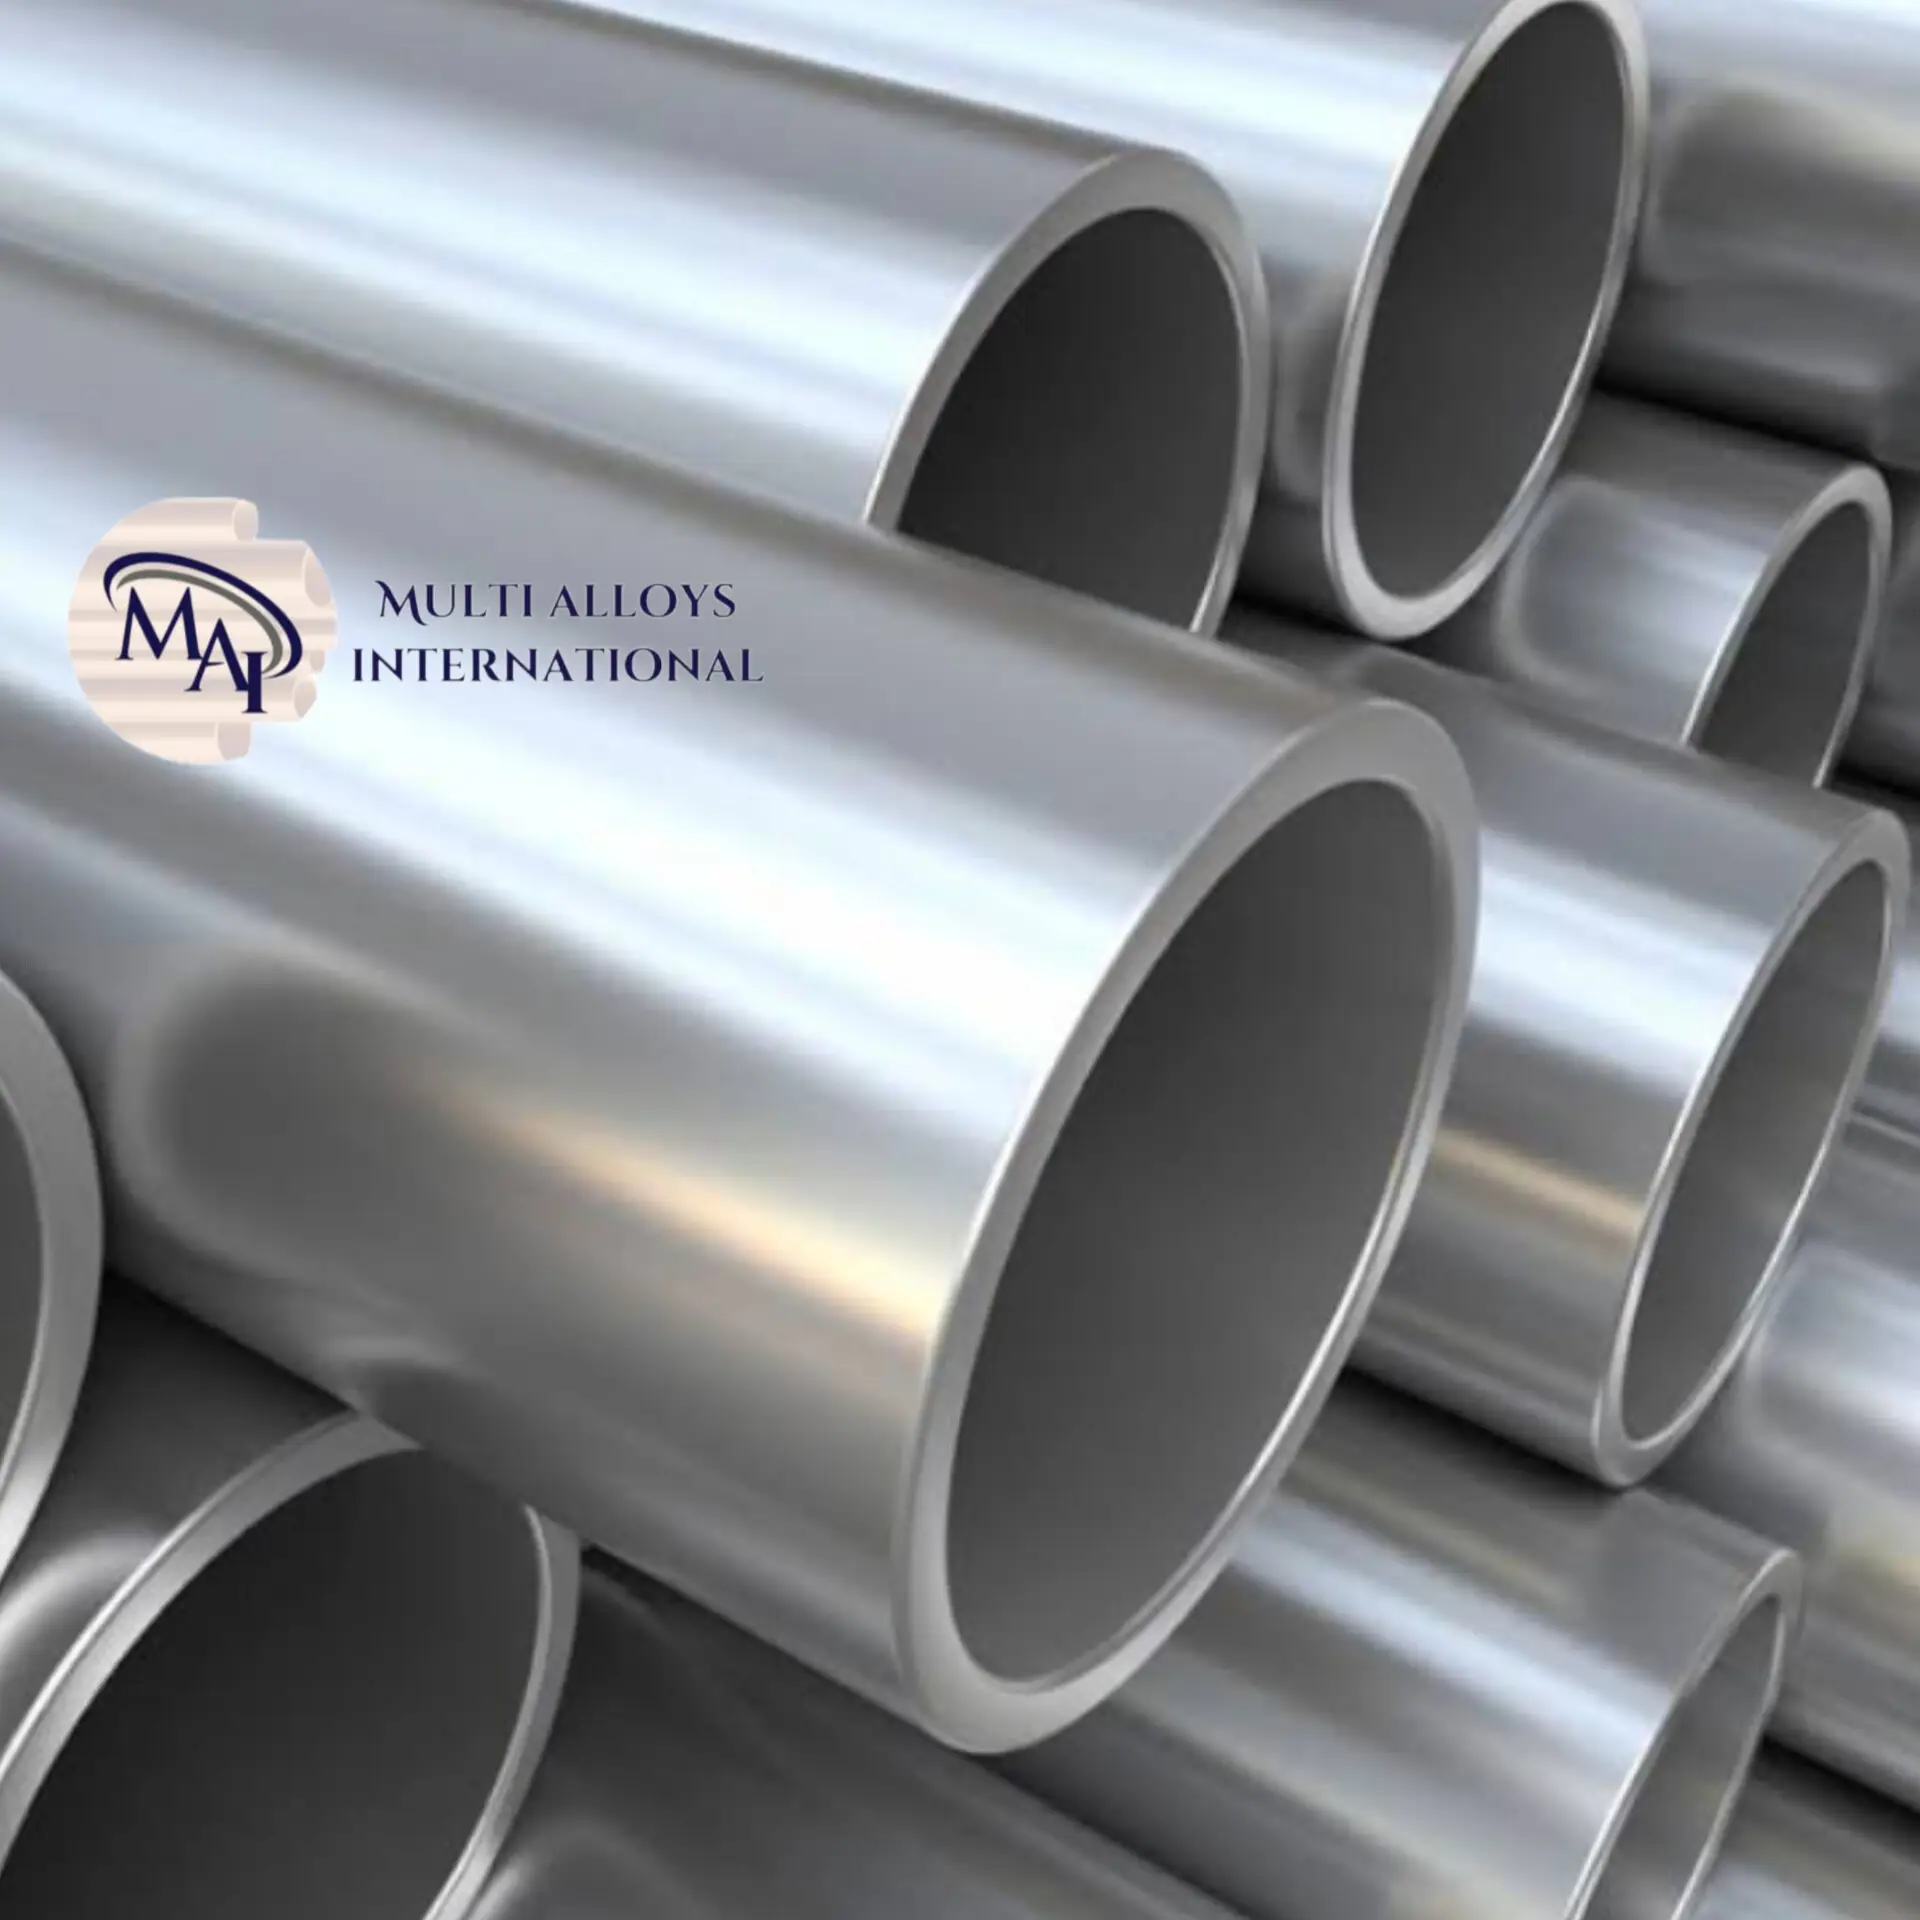 Nickel-based alloy tubes offer a range of excellent mechanical and physical properties for demanding environments